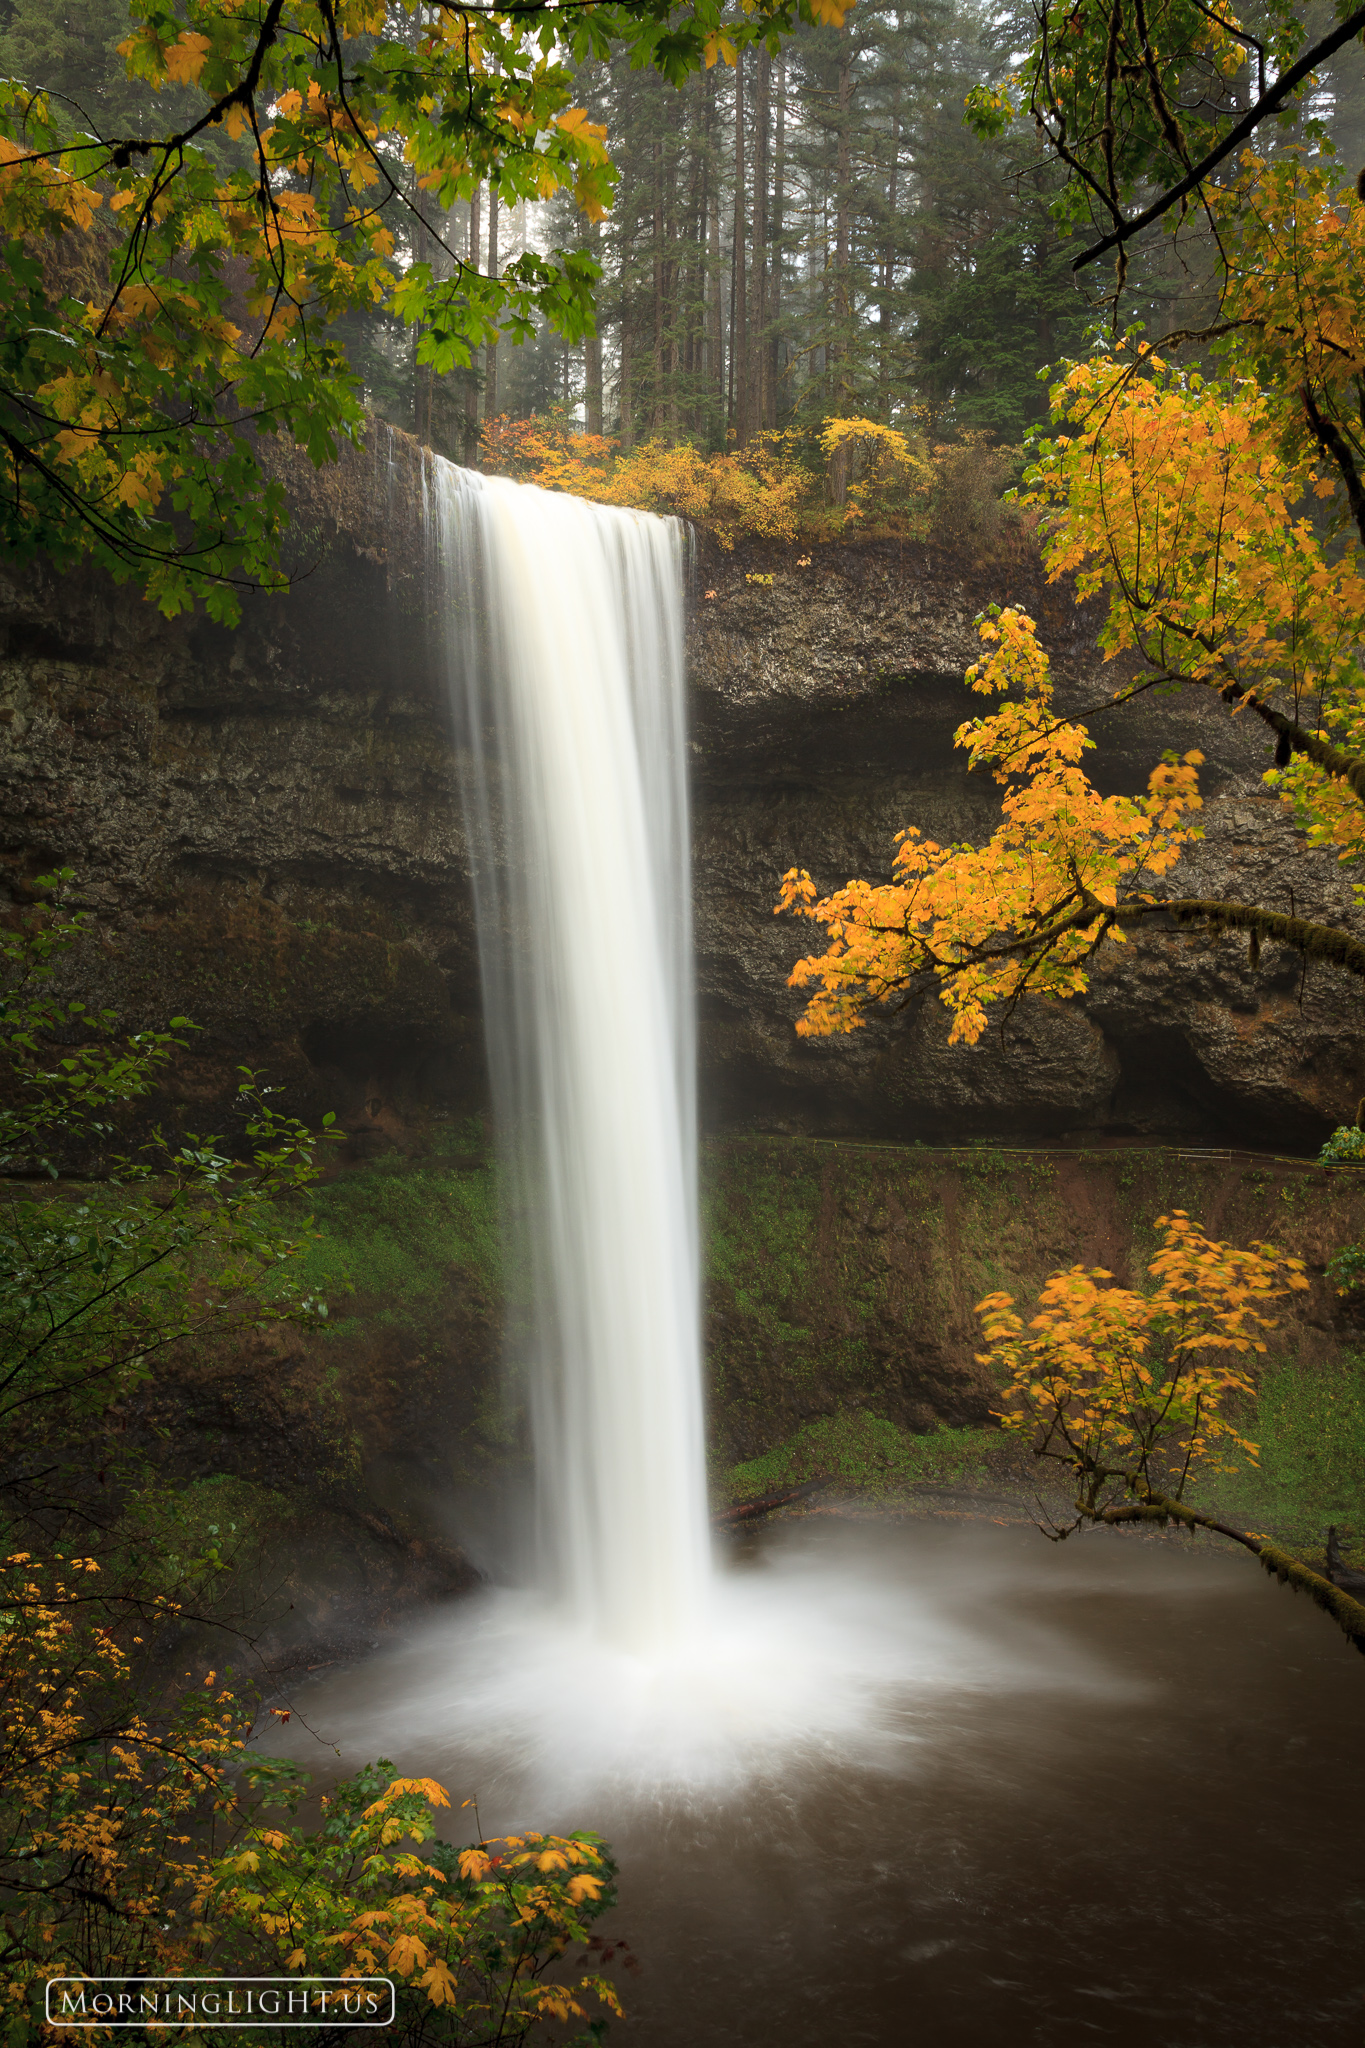 South Falls in Silver Falls State Park is a spectacular place, particularly when the leaves take on their autumn vibrance.